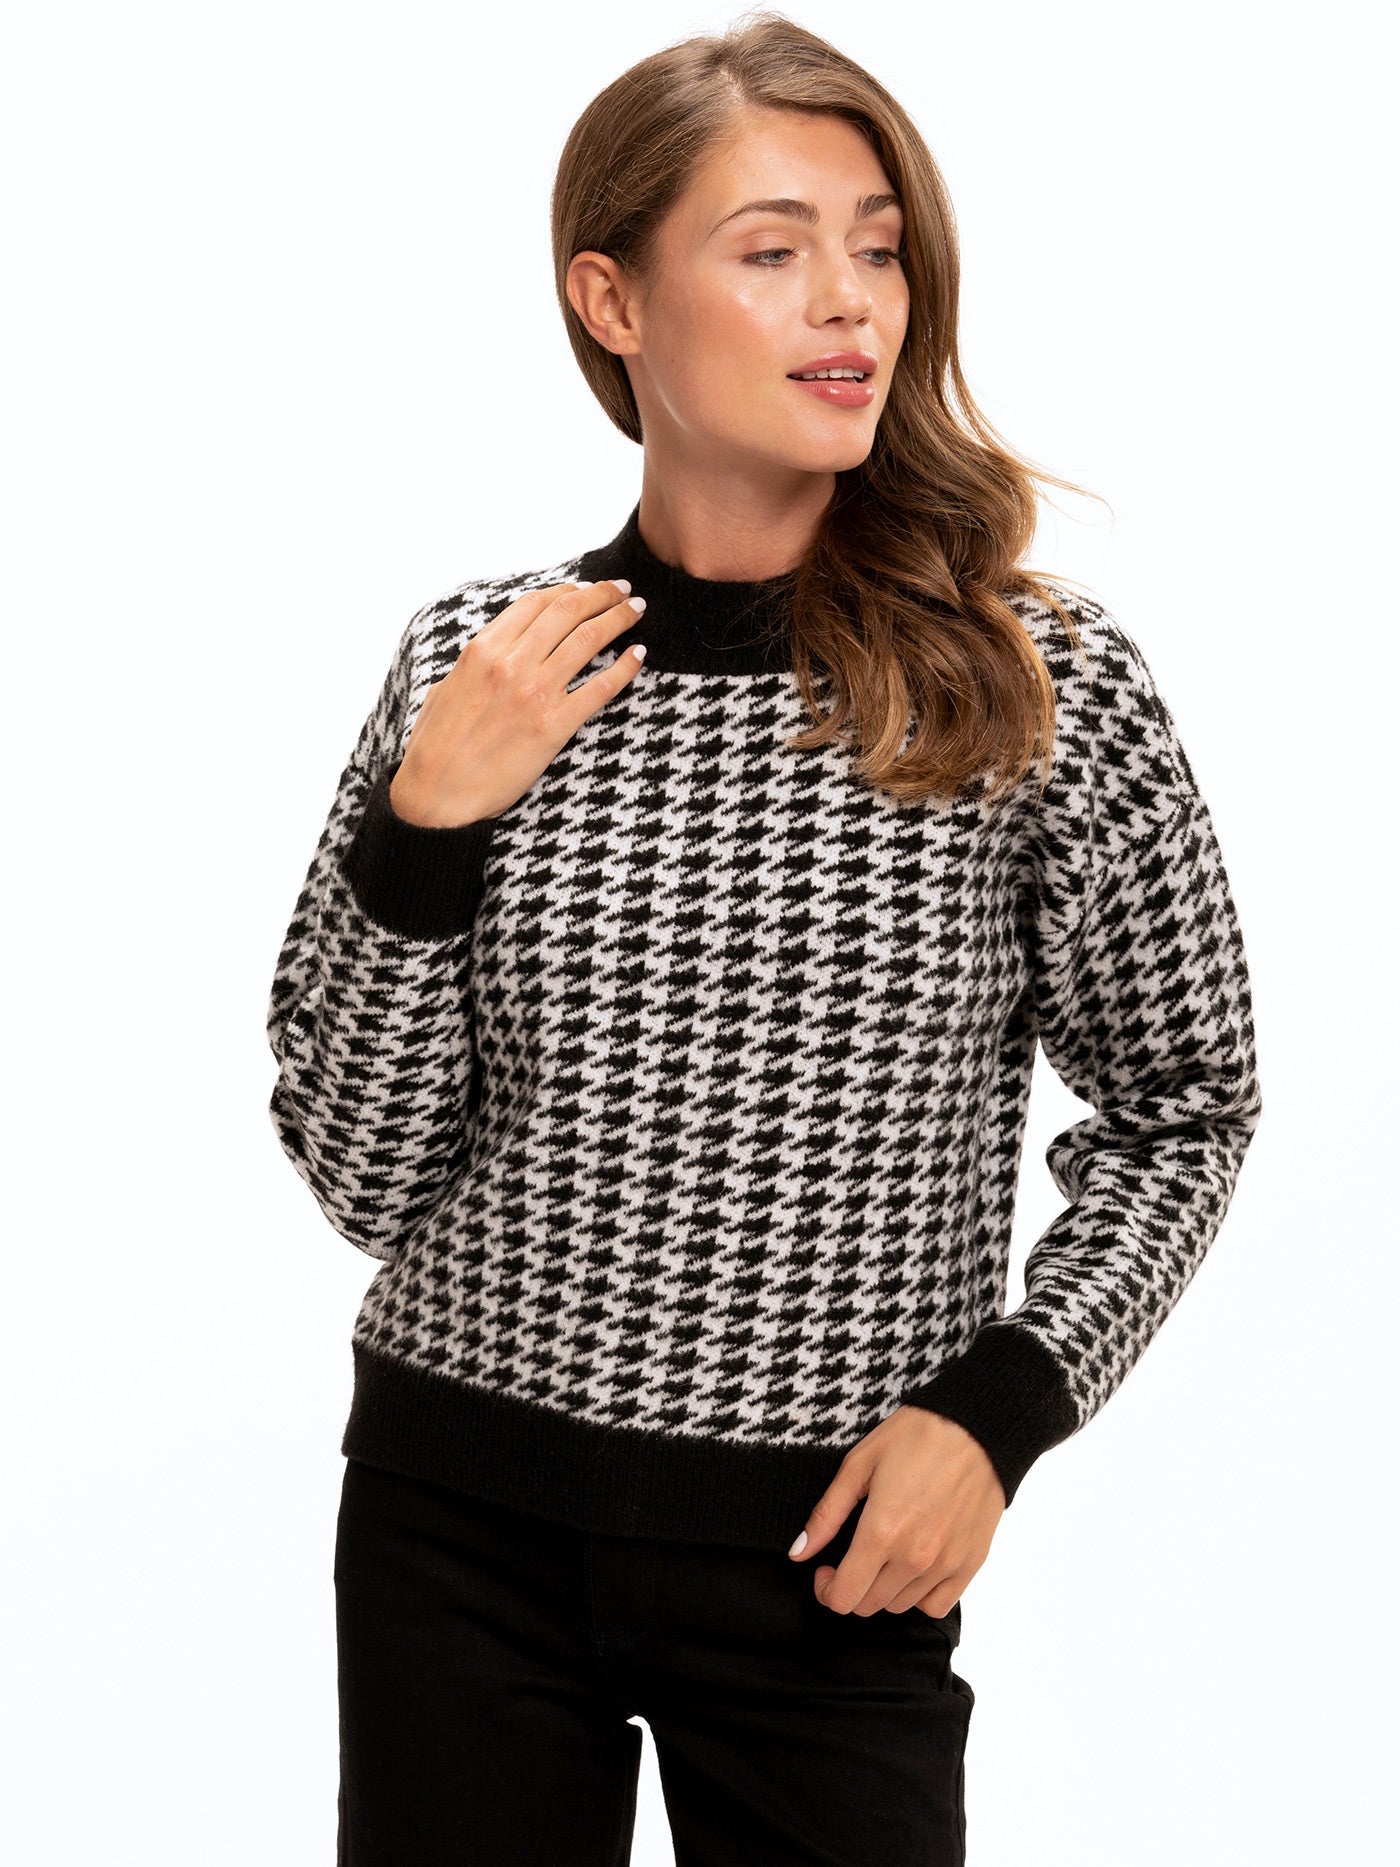 Elexia Houndstooth Sweater Womens Outerwear Sweater Threads 4 Thought 